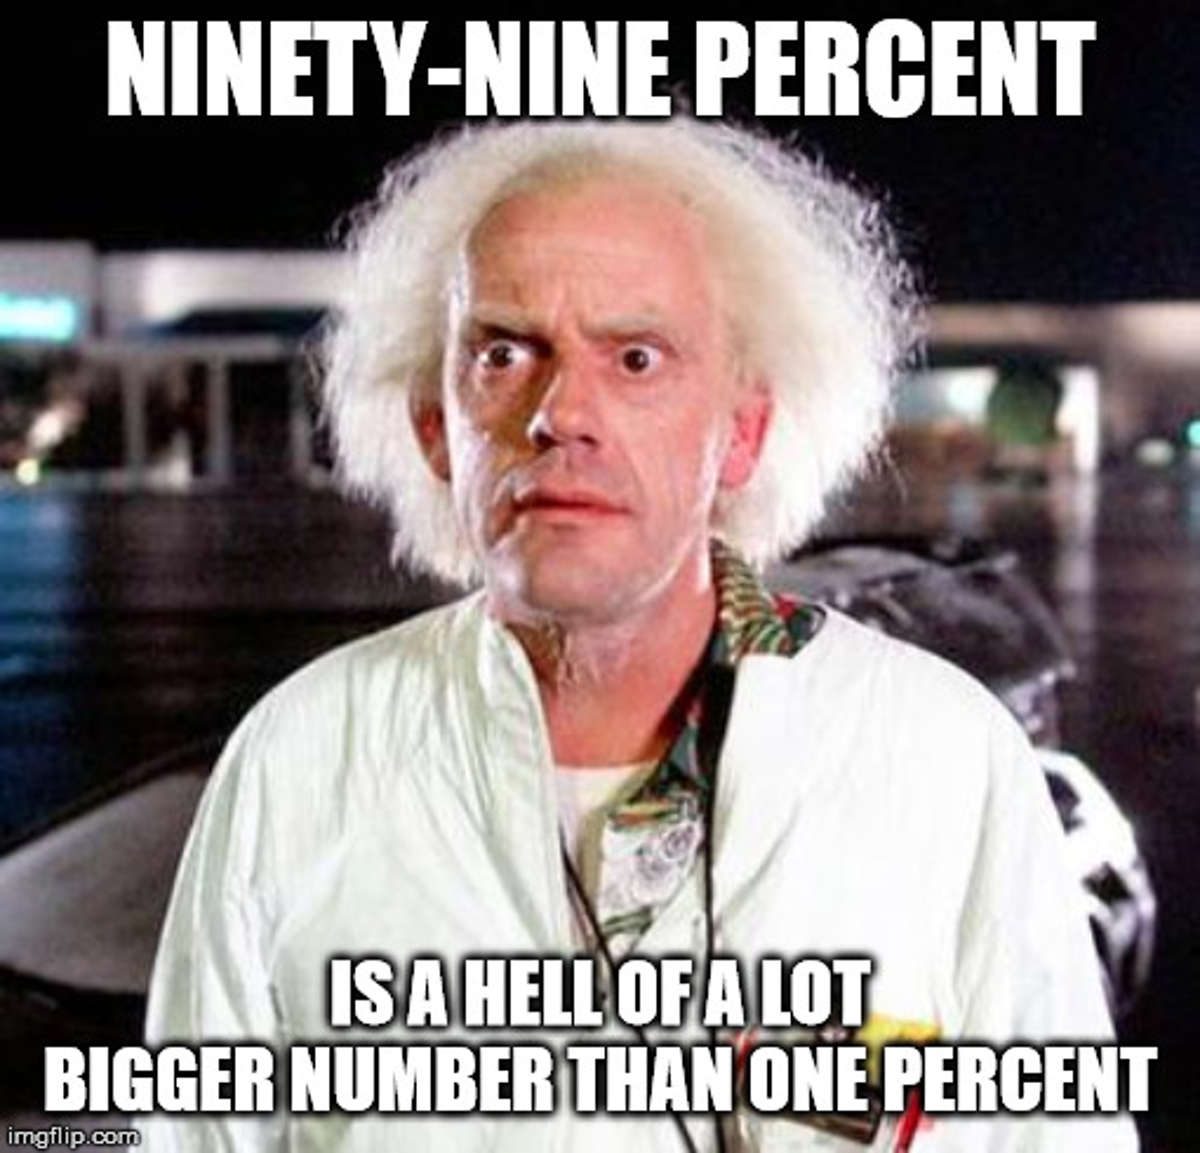 Doc Brown of Back to the Future (1985) delivers a line he never said